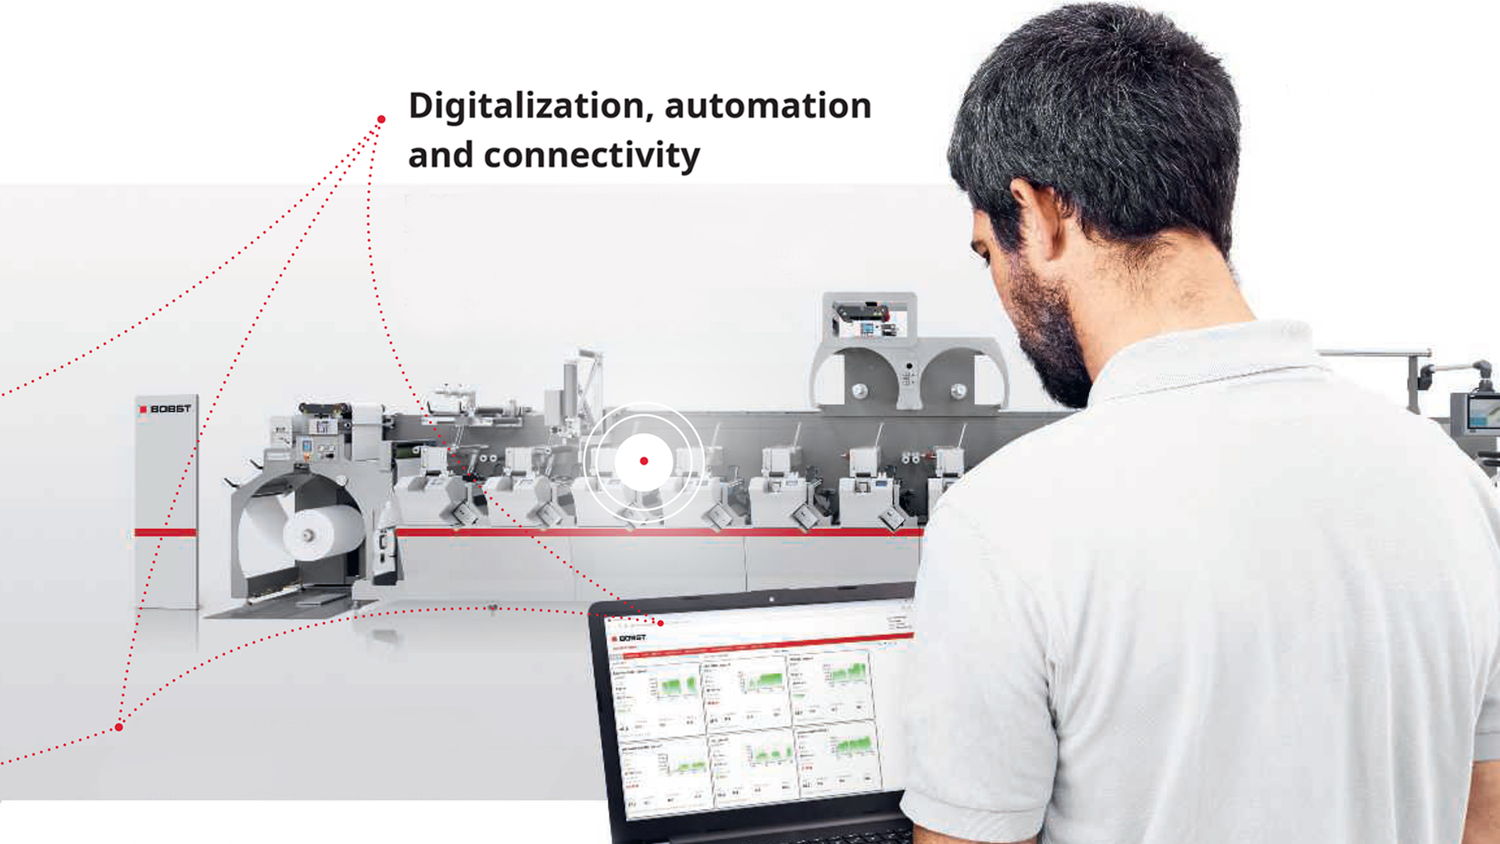 Digitalization, automation and connectivity